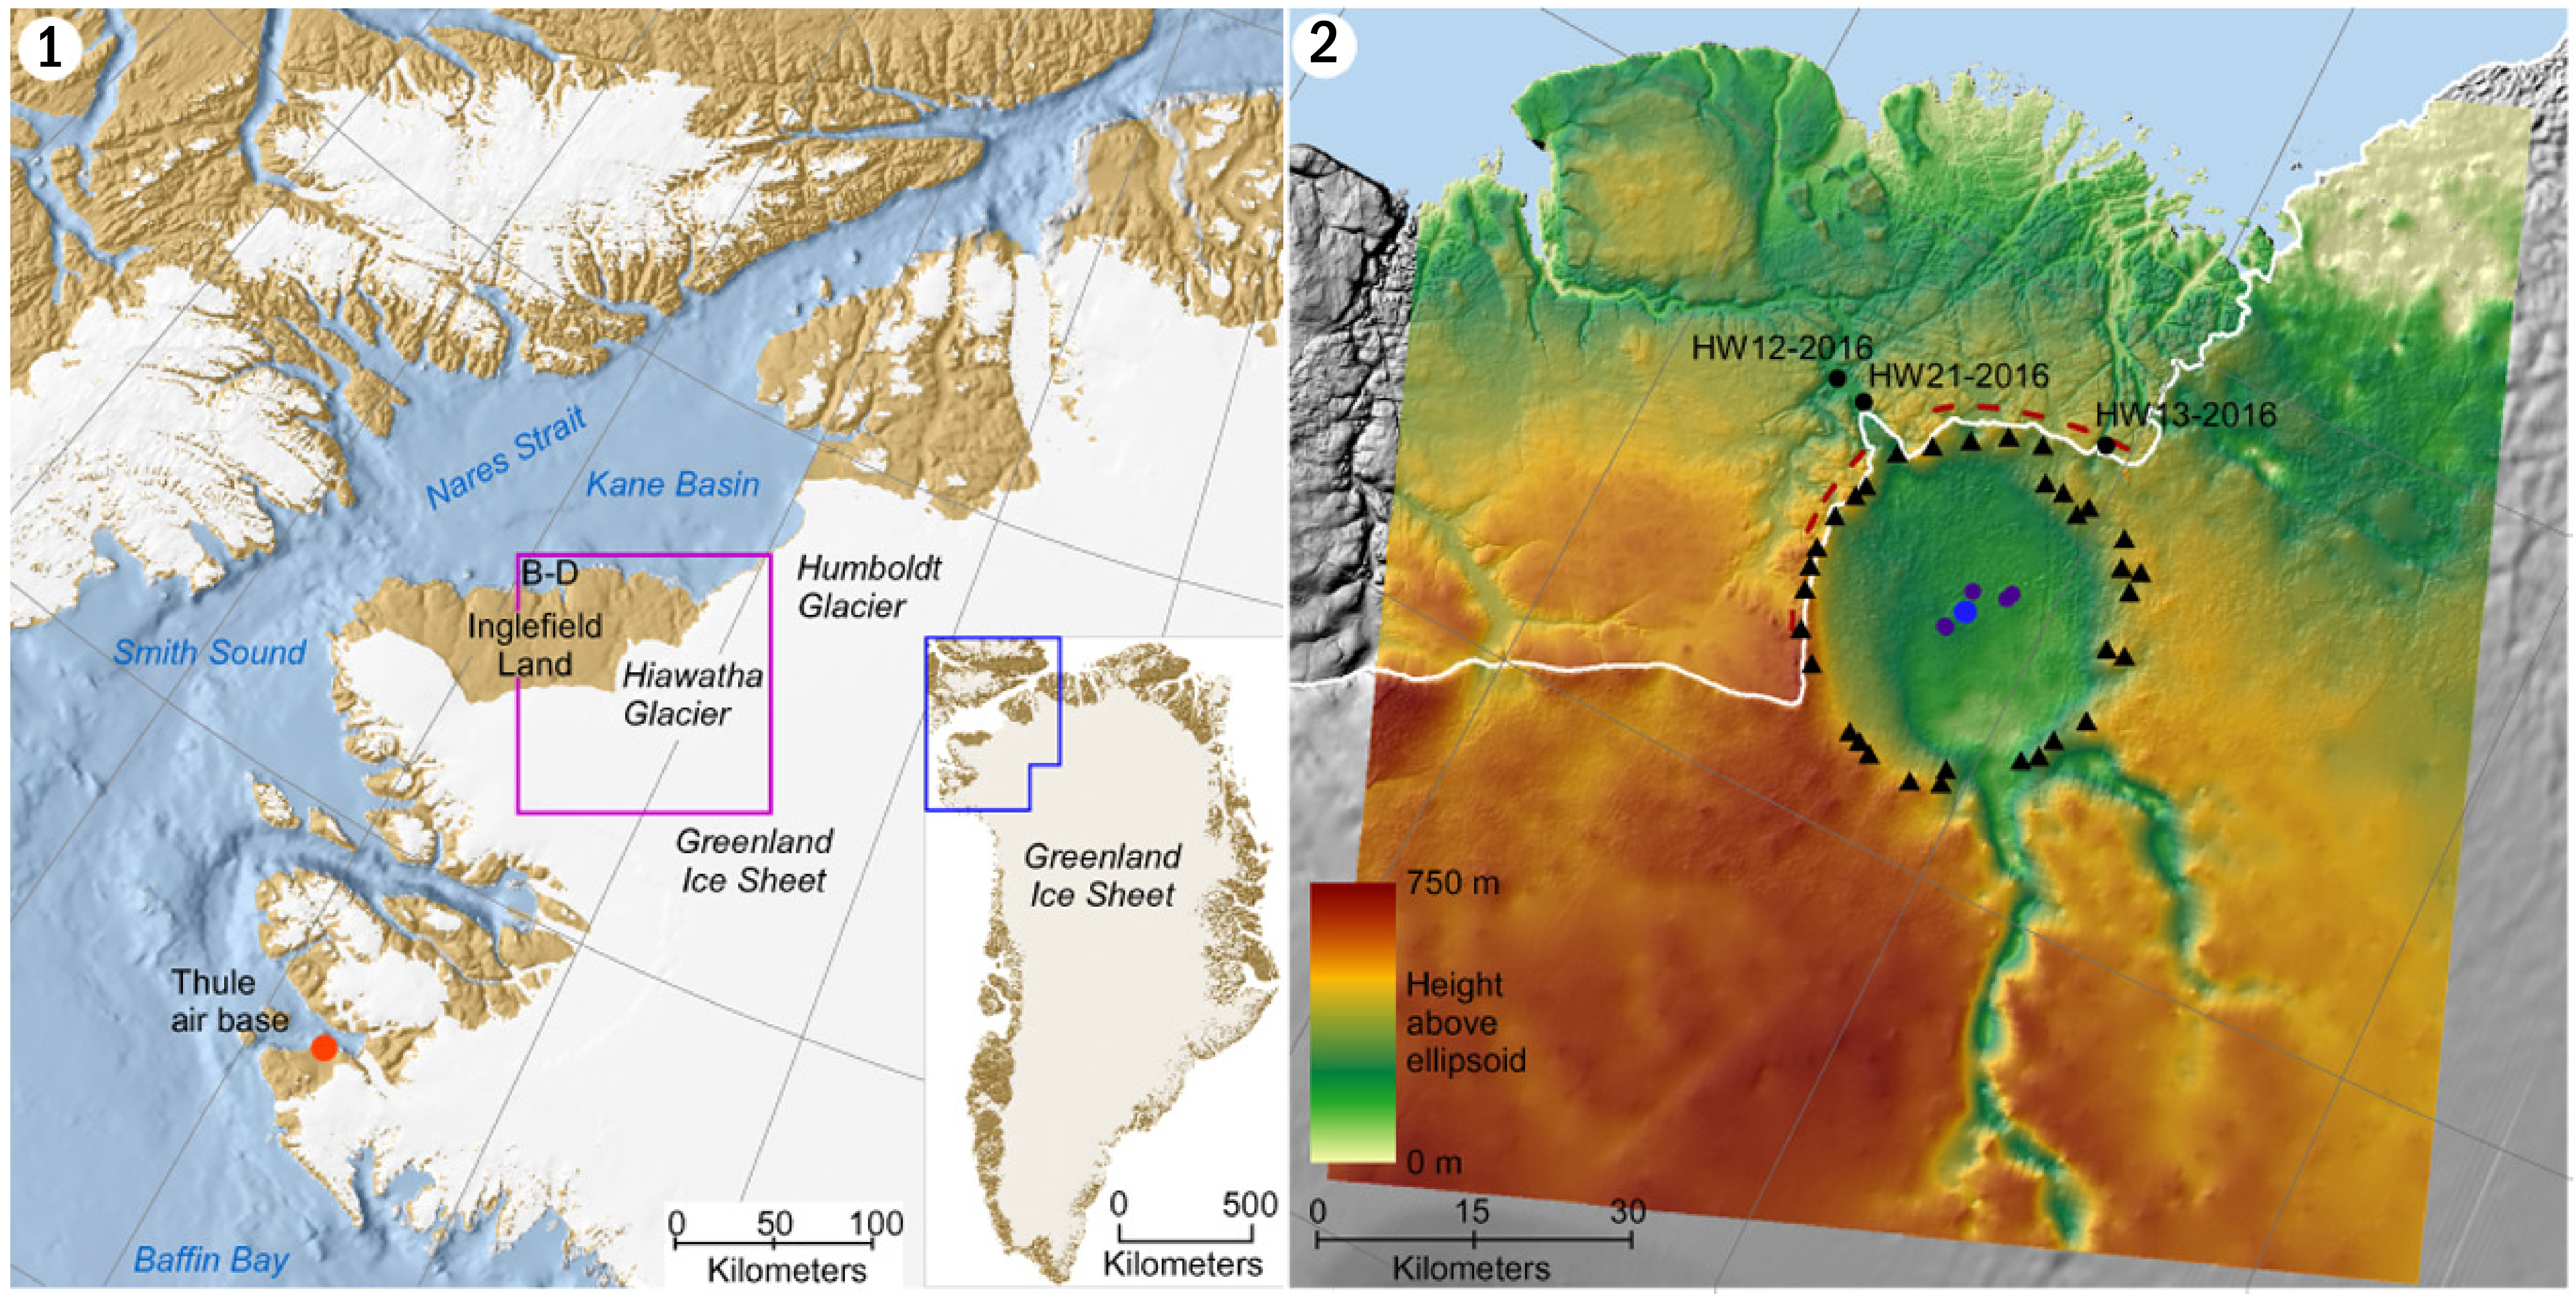 crater has been discovered at the edge of Greenland’s Hiawatha glacier